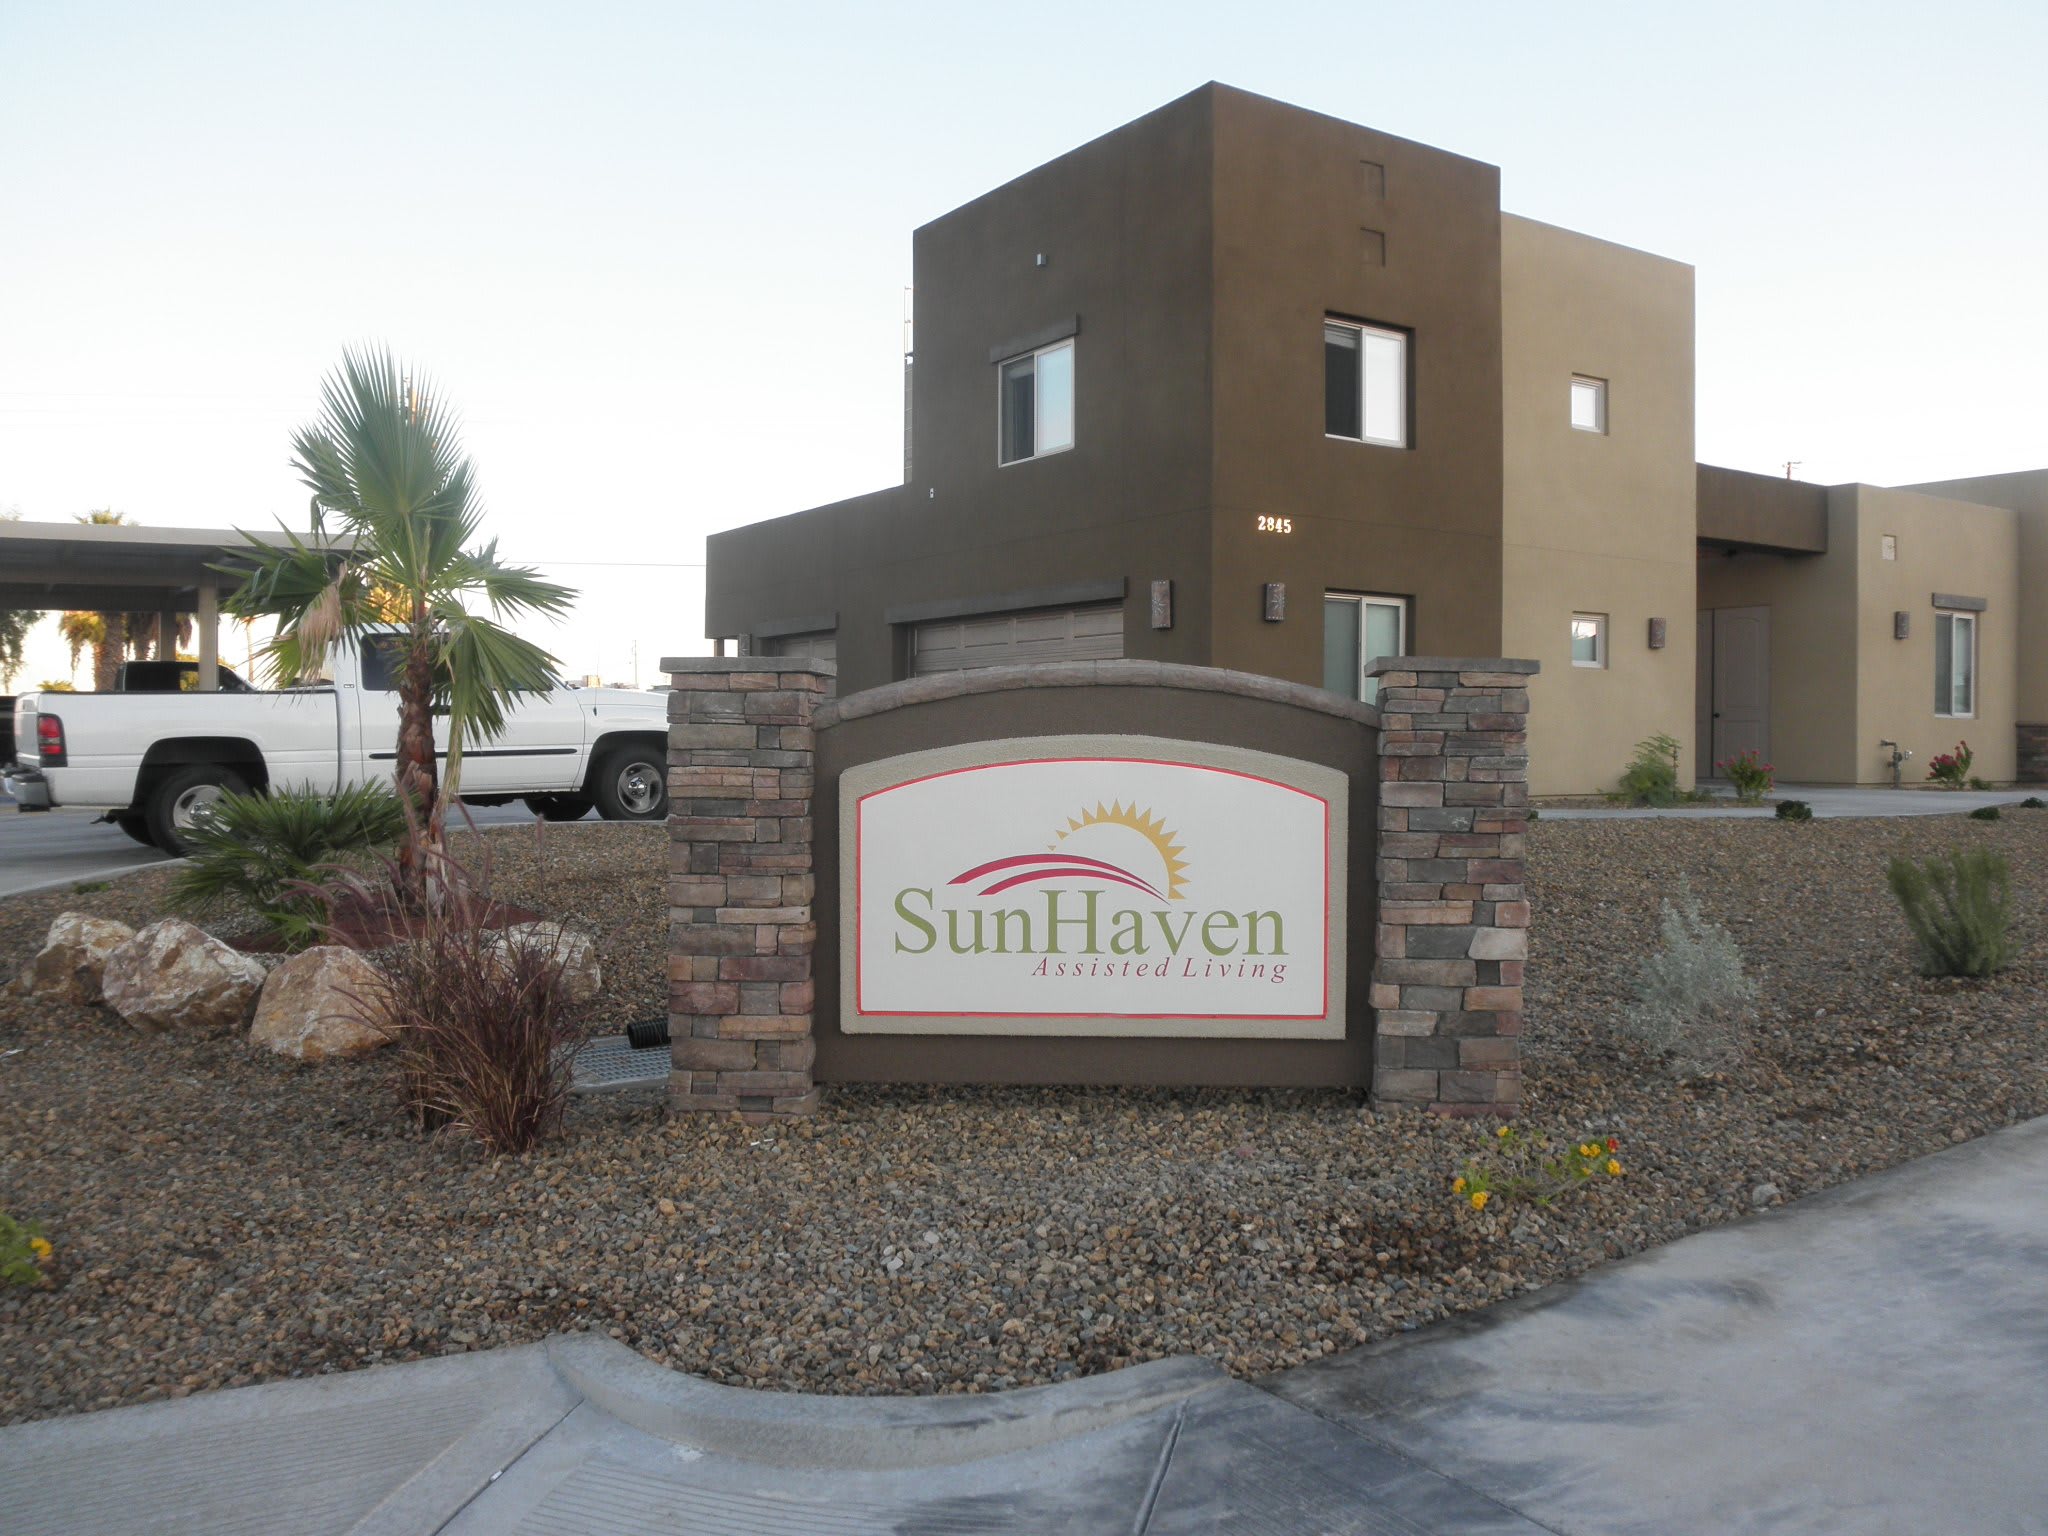 SunHaven Assisted Living - South